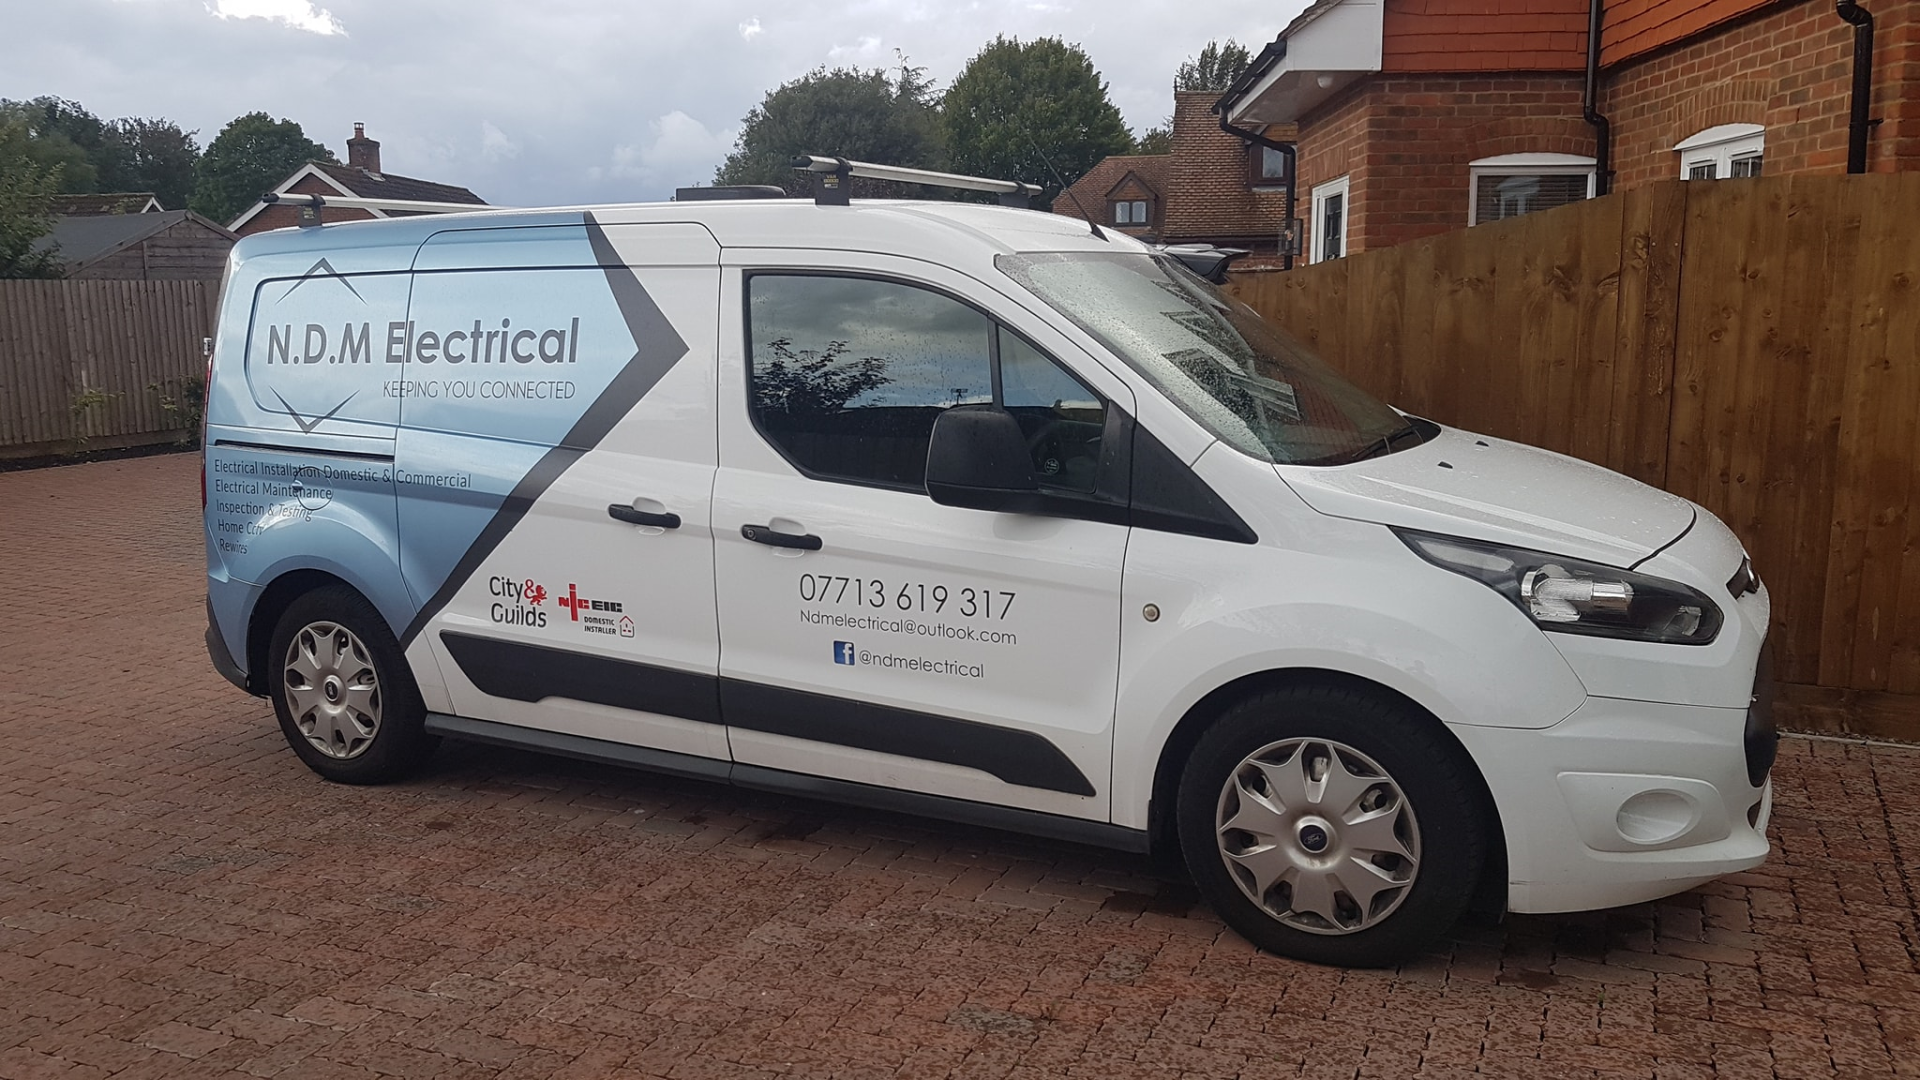 Electrician in Hampshire - N.D.M Electrical